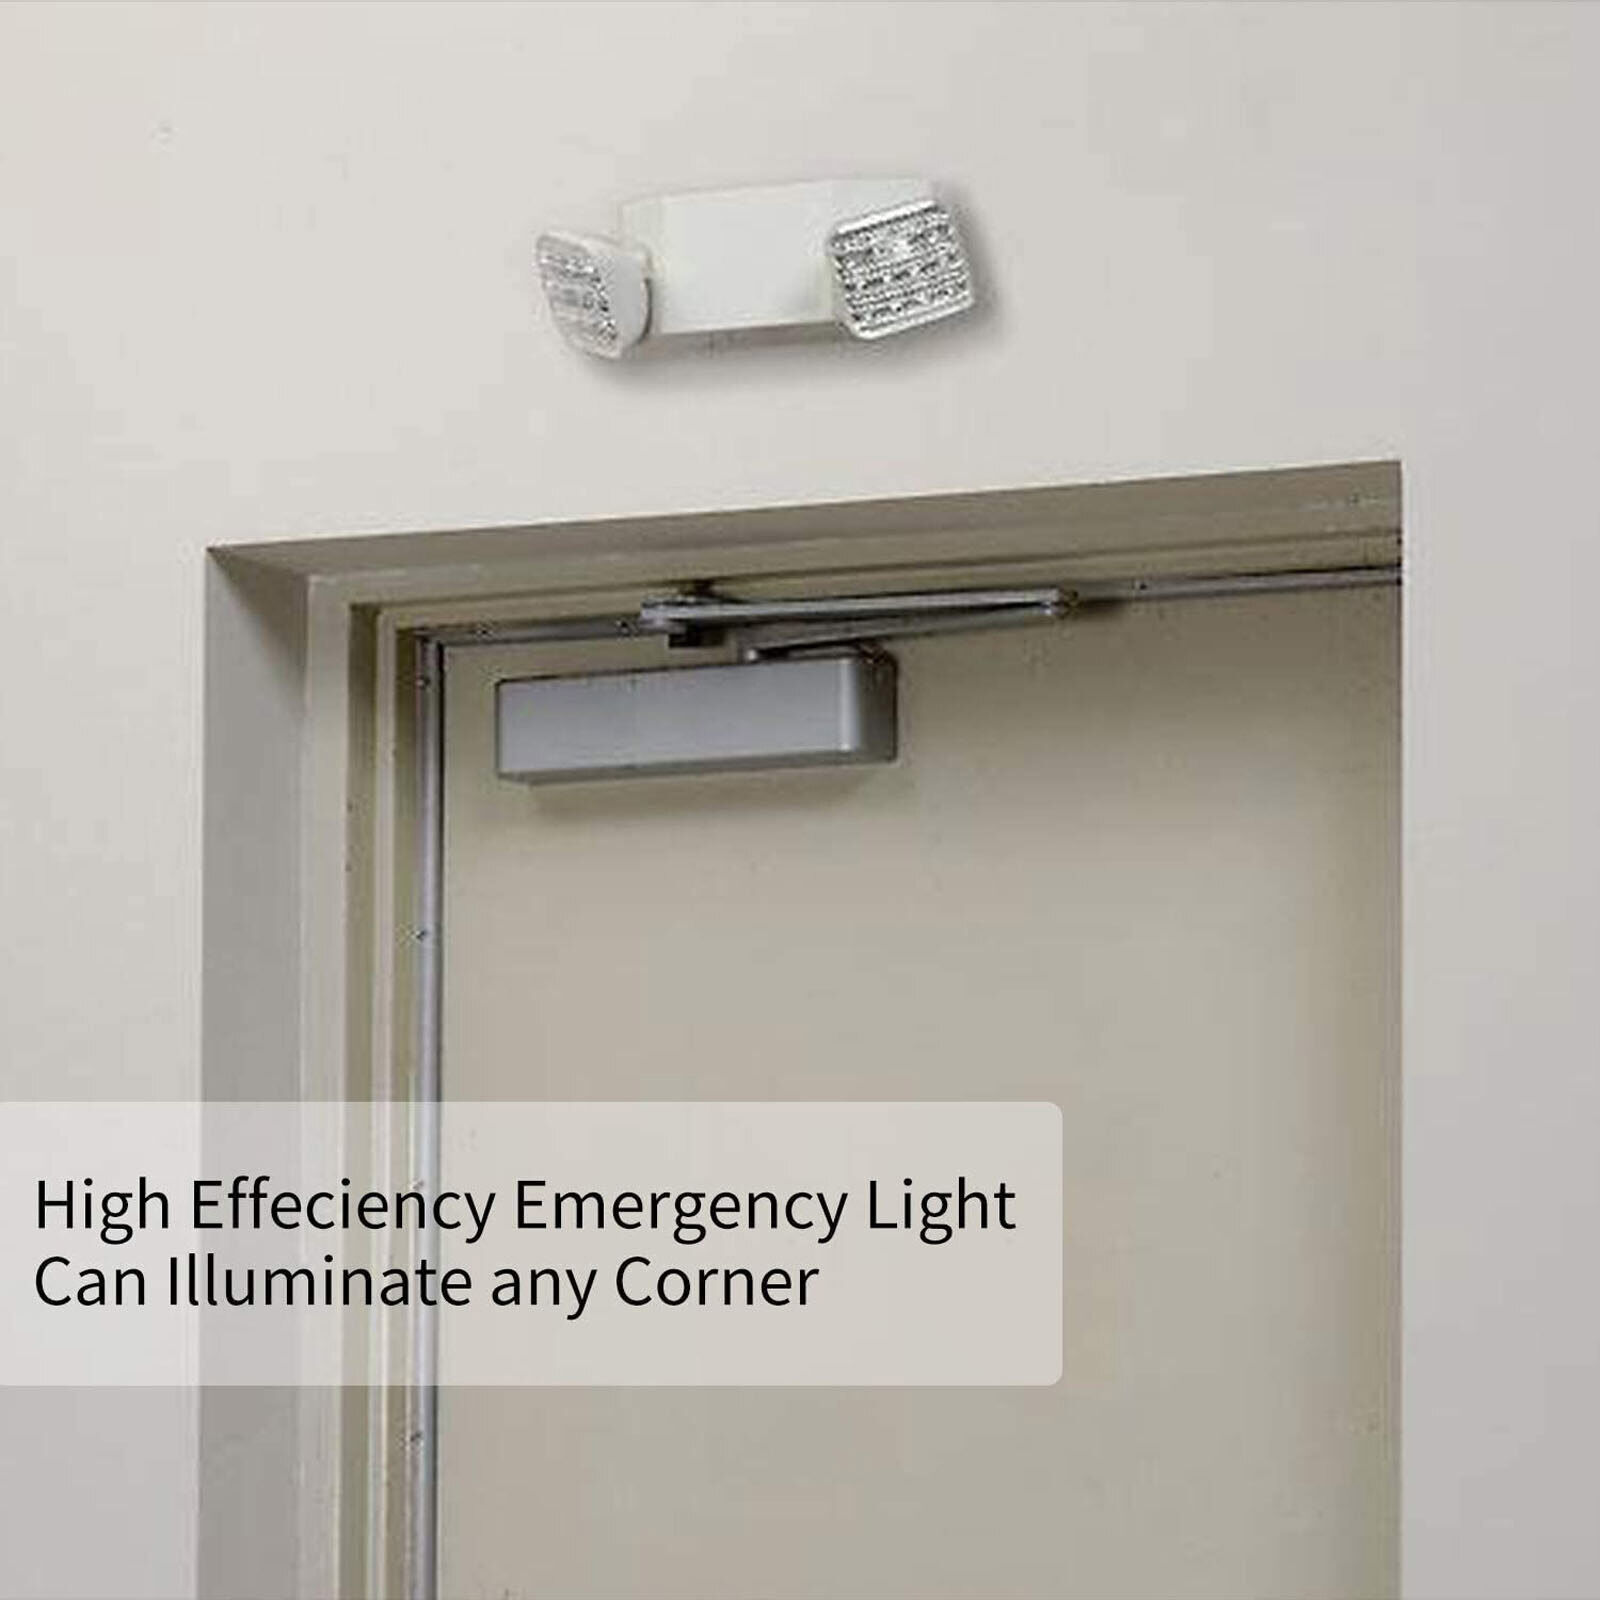 6Pack LED Emergency Exit Light Adjustable 2 Head With Battery Back-up  924-NEW Unbranded Does Not Apply - фотография #7